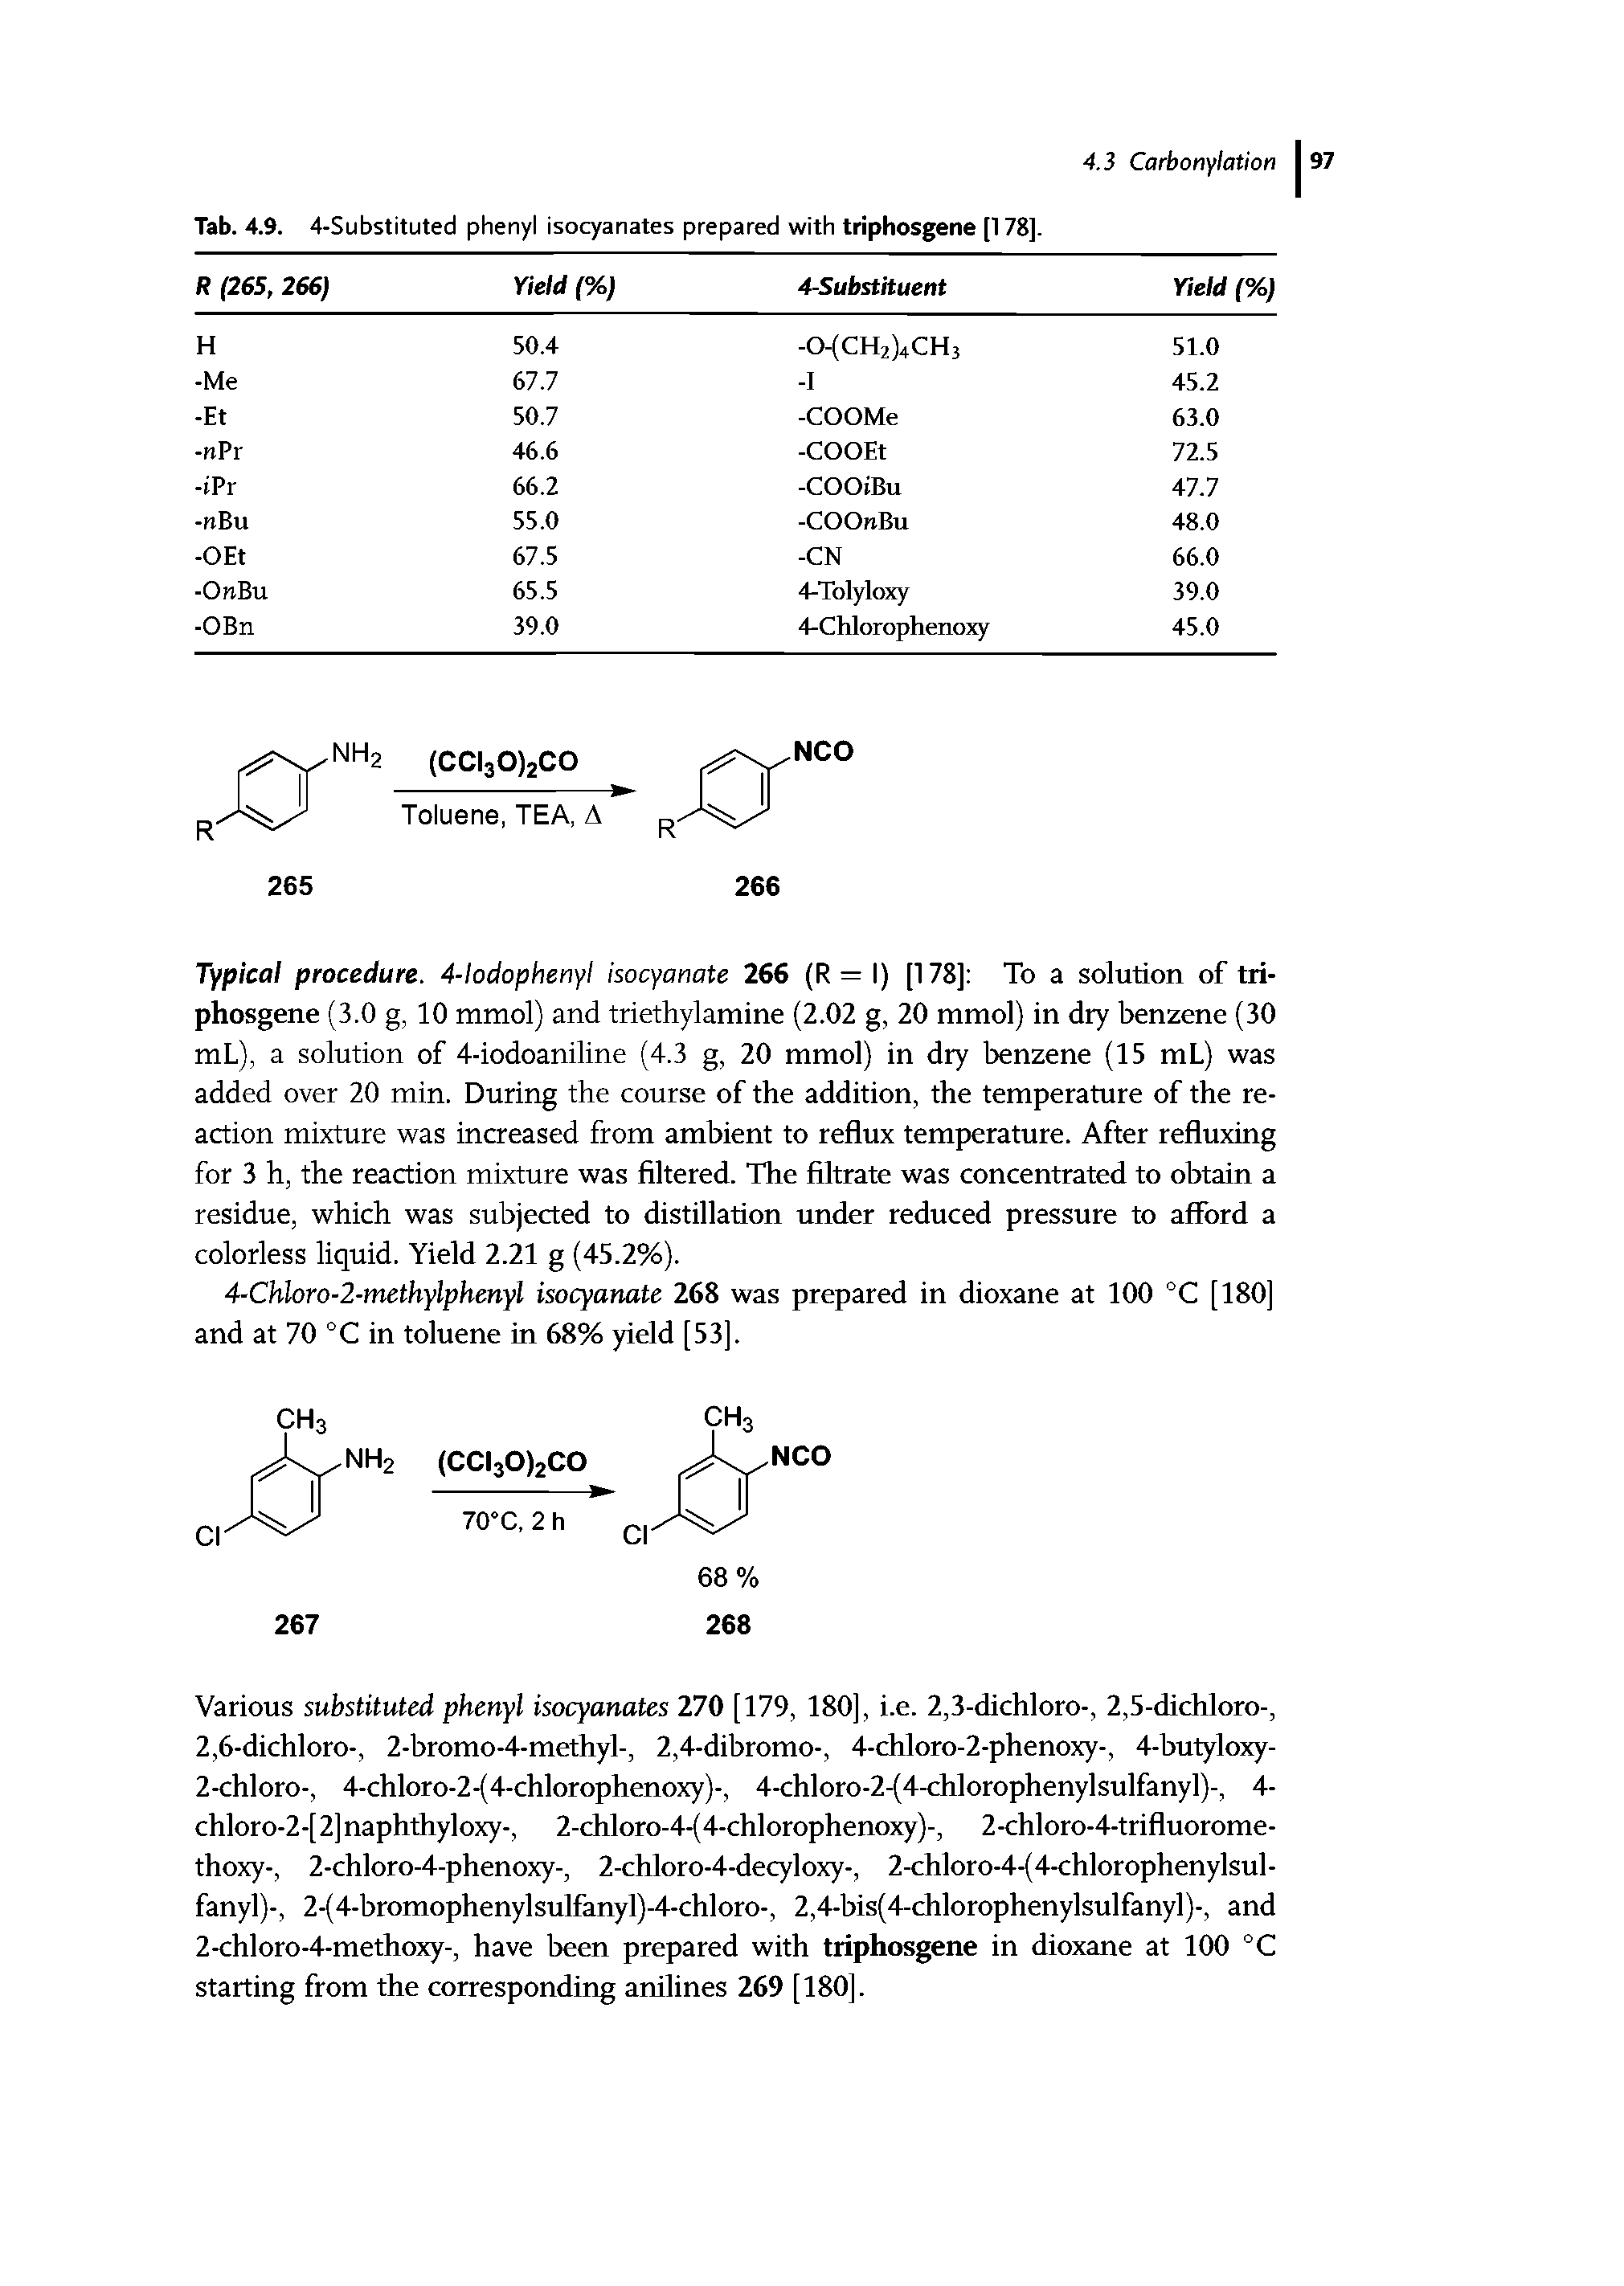 Tab. 4.9. 4-Substituted phenyl isocyanates prepared with triphosgene [178].